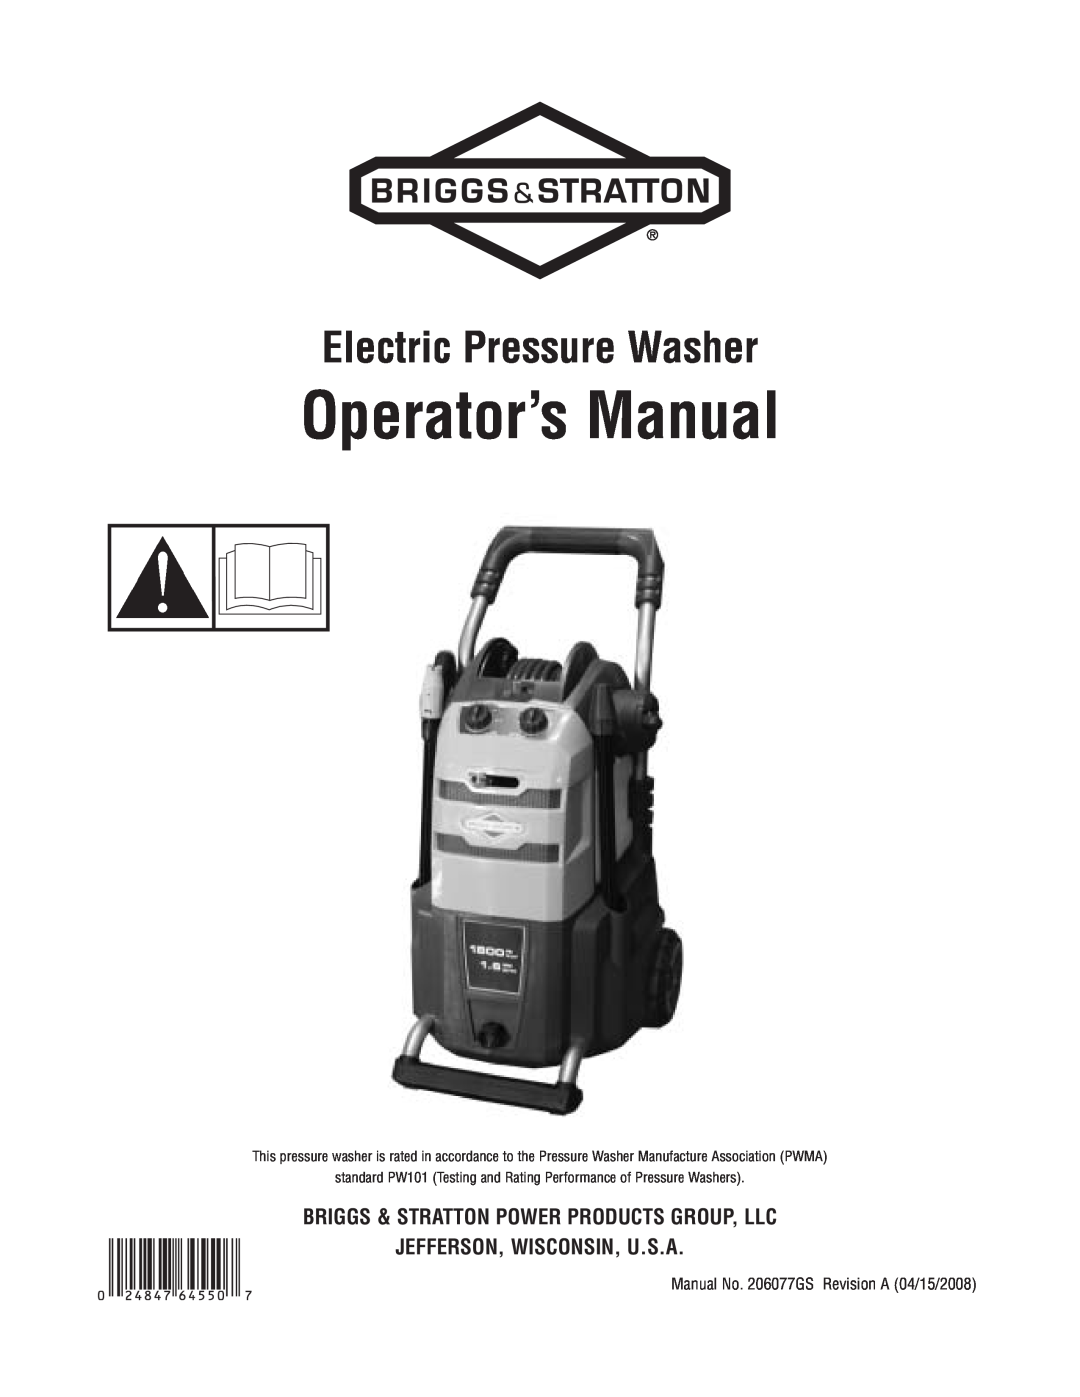 Briggs & Stratton Electric Pressure Washer manual Operator’s Manual, Briggs & Stratton Power Products Group, Llc 